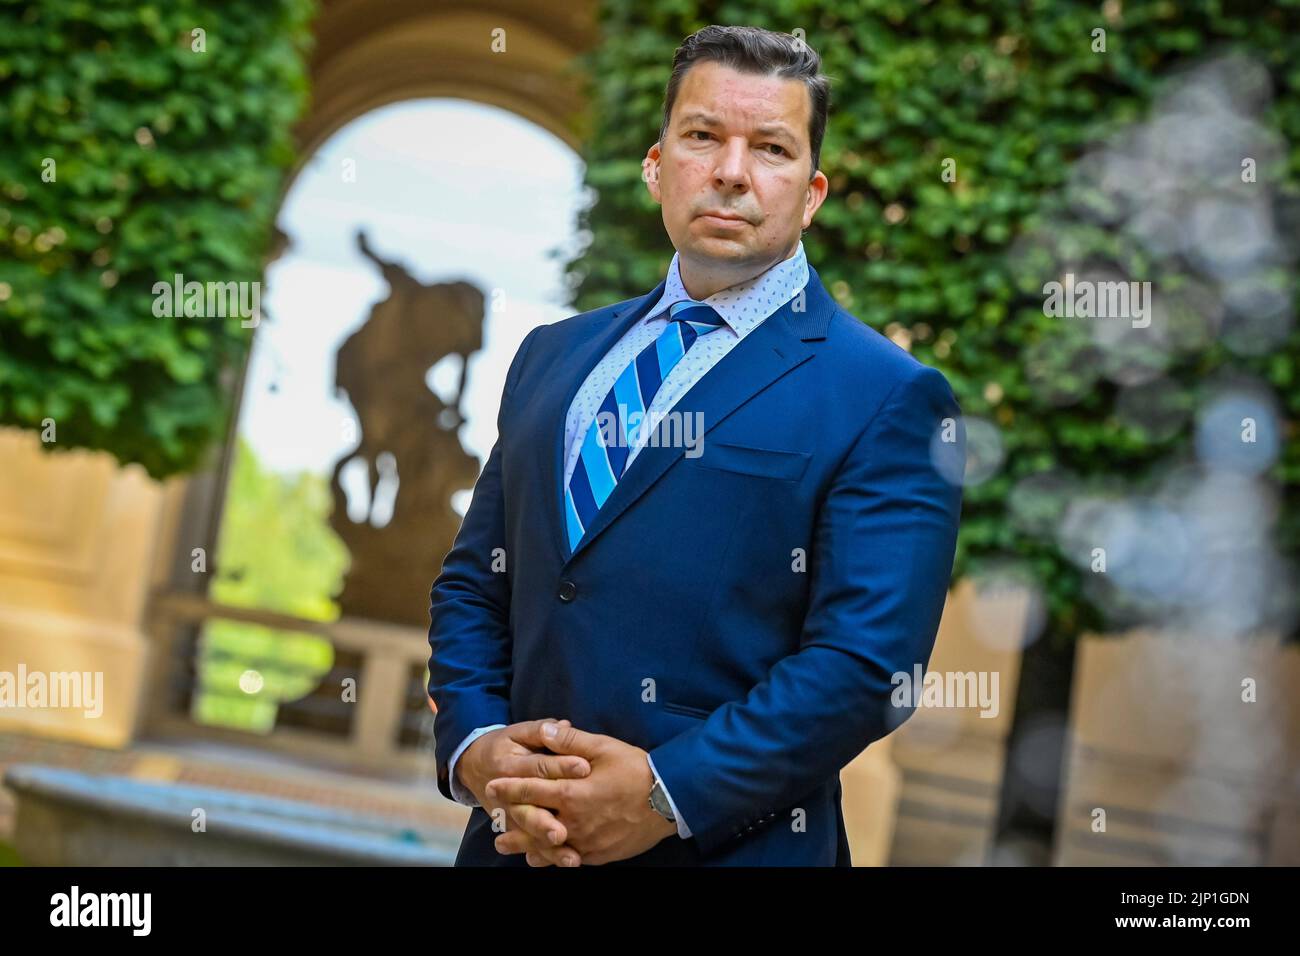 Prague, Czech Republic. 15th Aug, 2022. State Secretary Miloslav Stasek, who will become ambassador to the USA in September 2022, poses on August 15, 2022, at the Ministry of Foreign Affairs in Prague, Czech Republic. Credit: Vit Simanek/CTK Photo/Alamy Live News Stock Photo